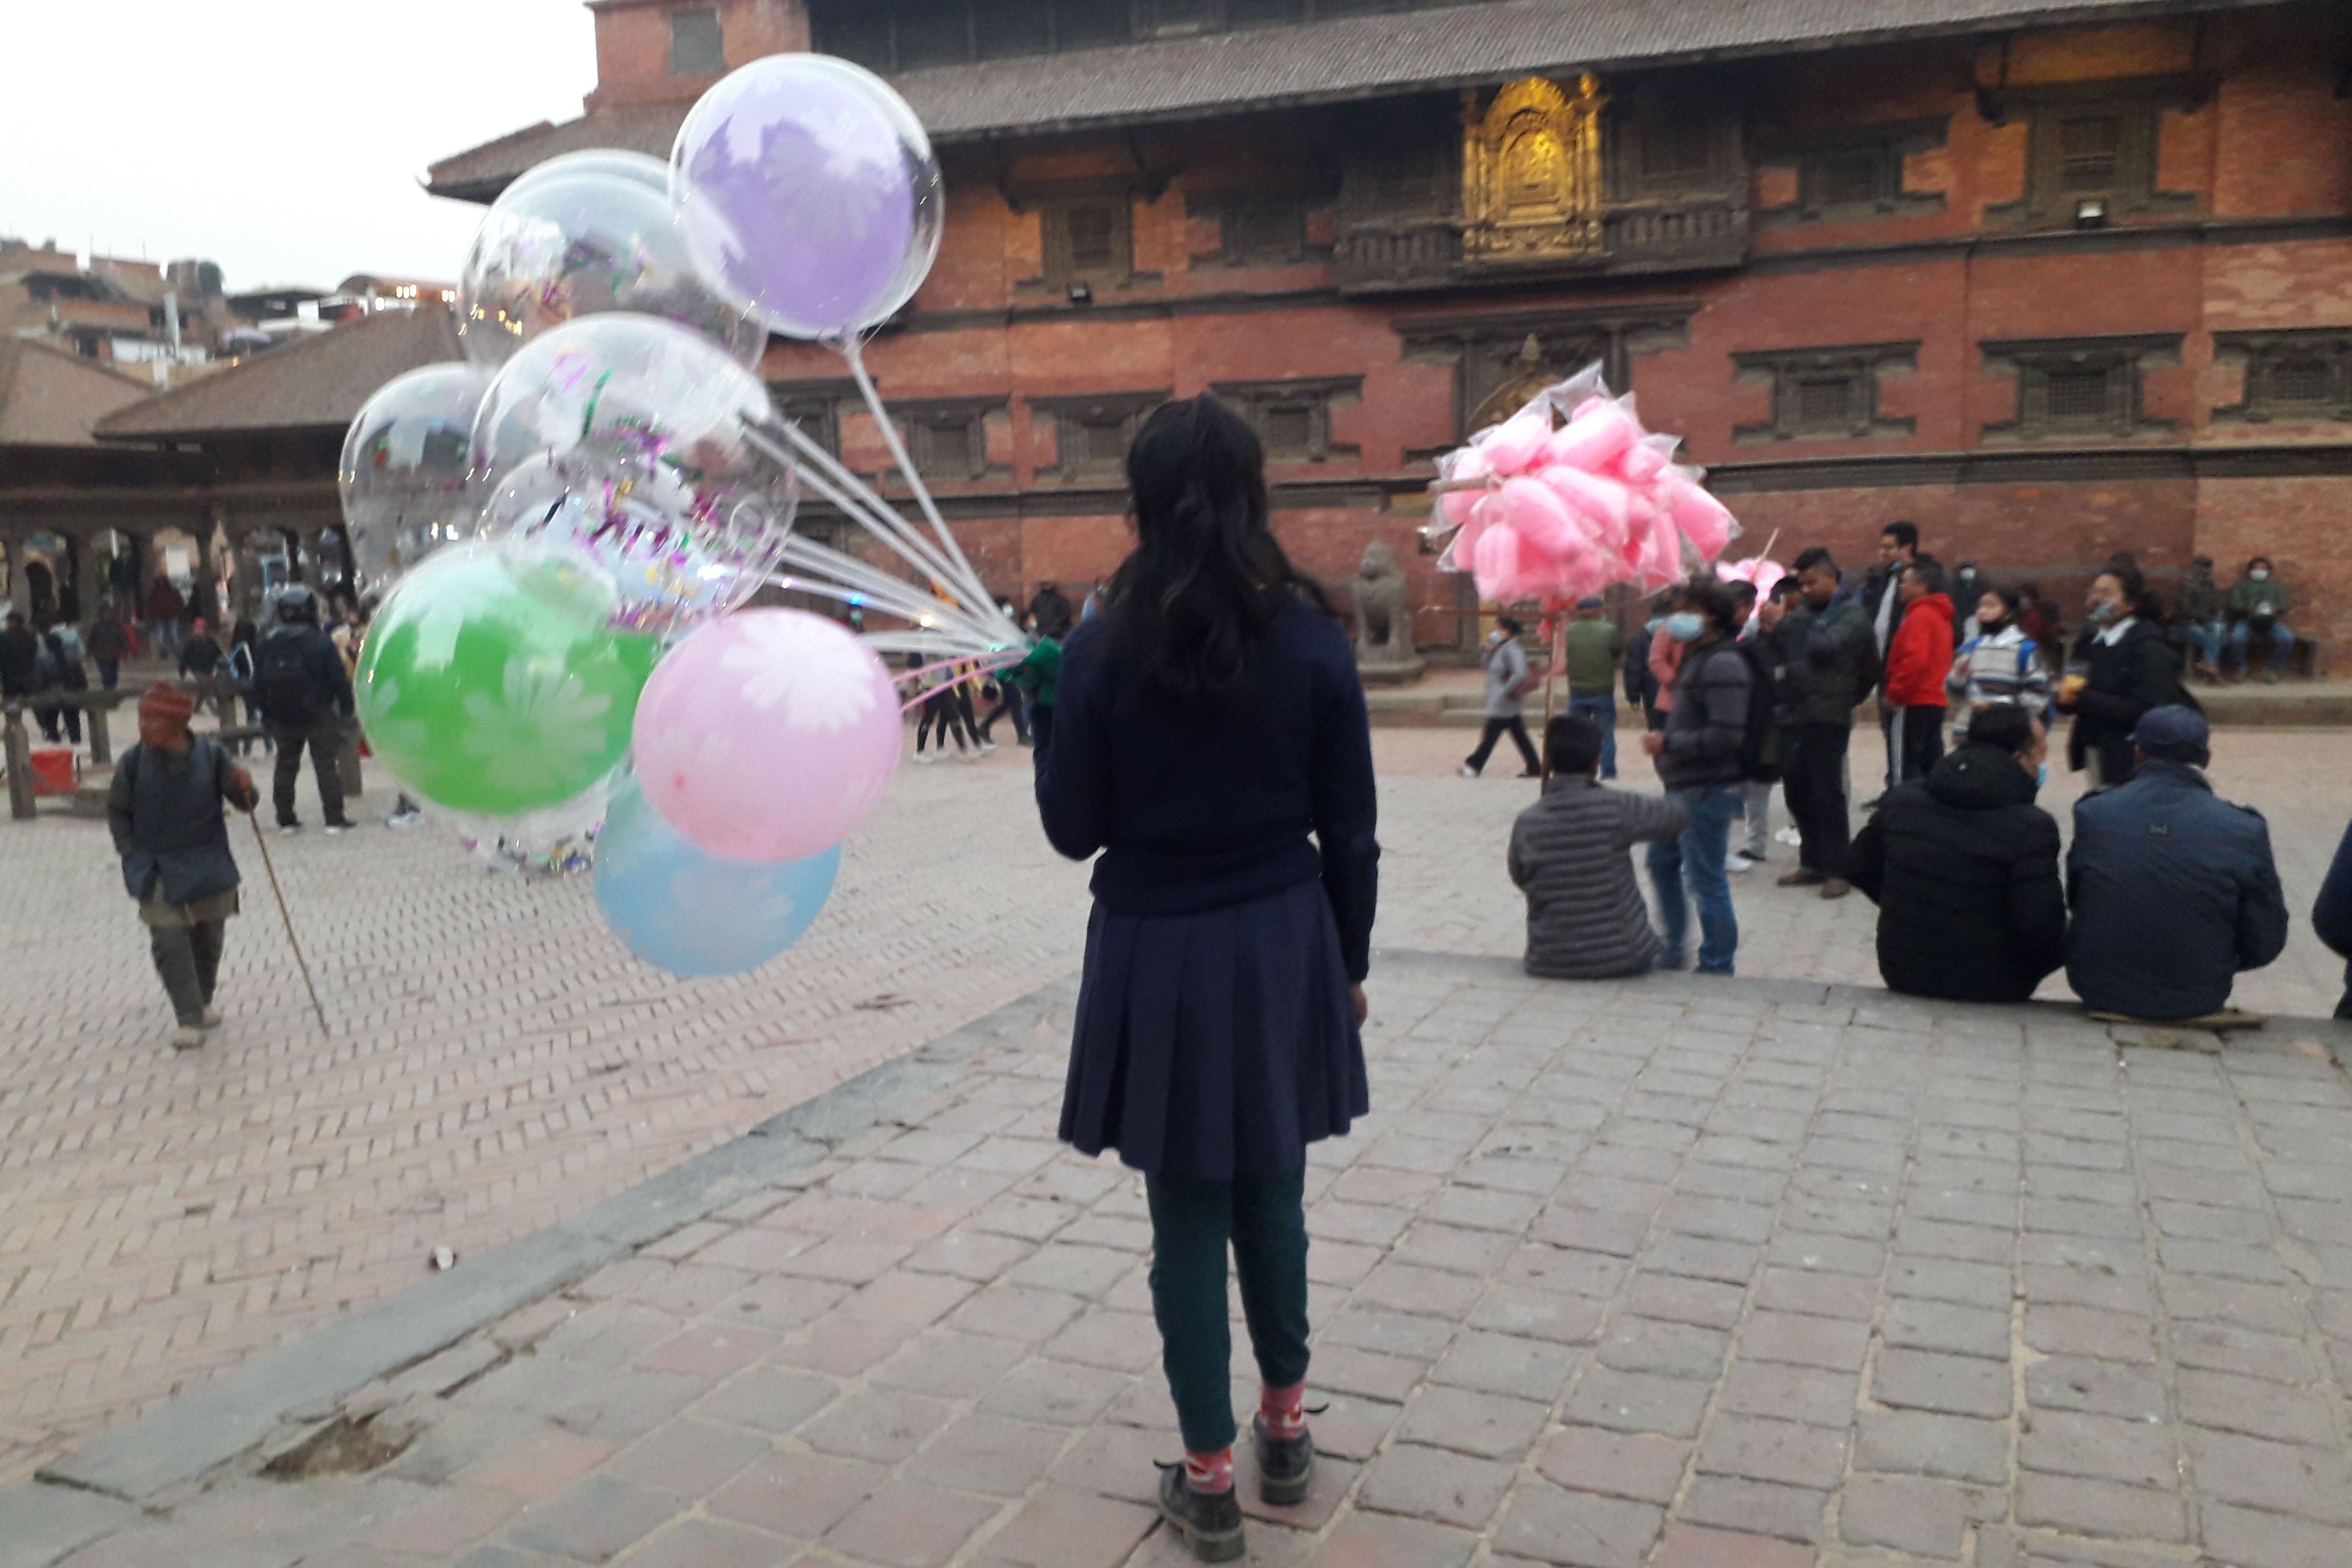 A girl holds a group of balloons to sell in a town square